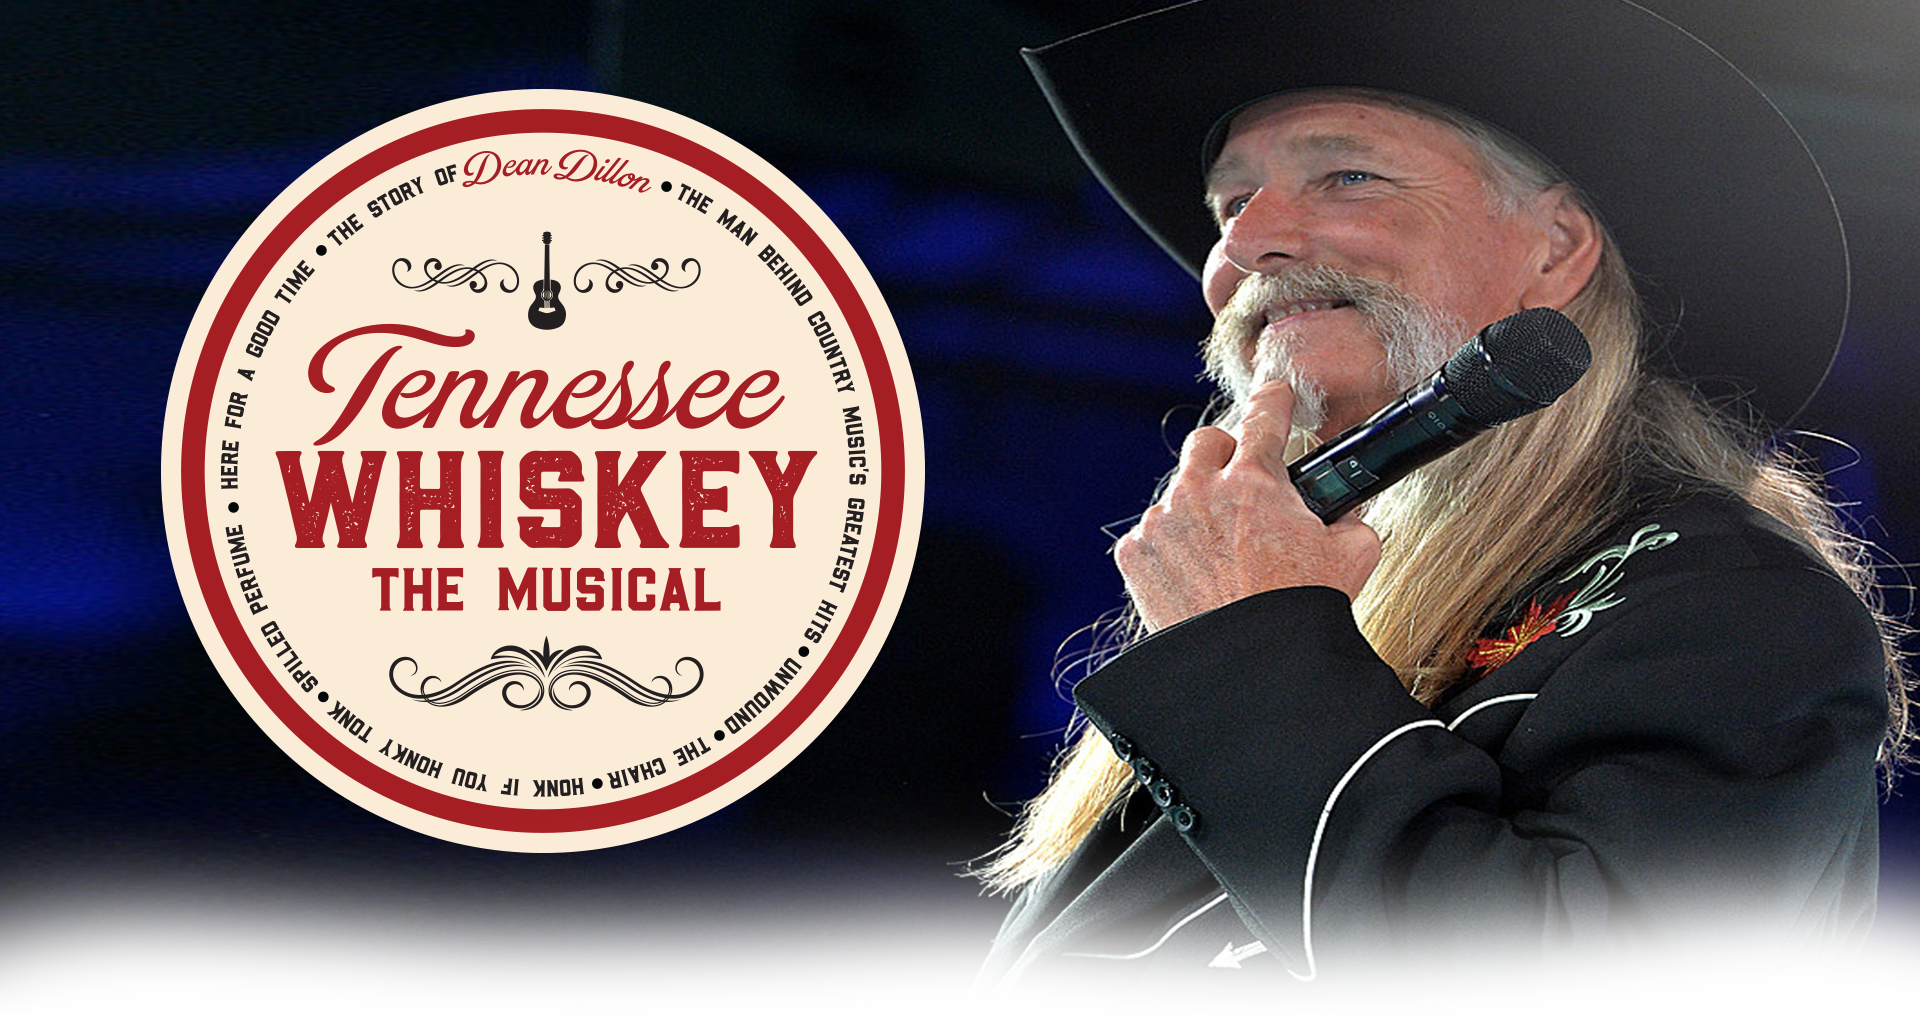 Tennessee Whiskey The Musical The Story Of Dean Dillon— The Man Behind